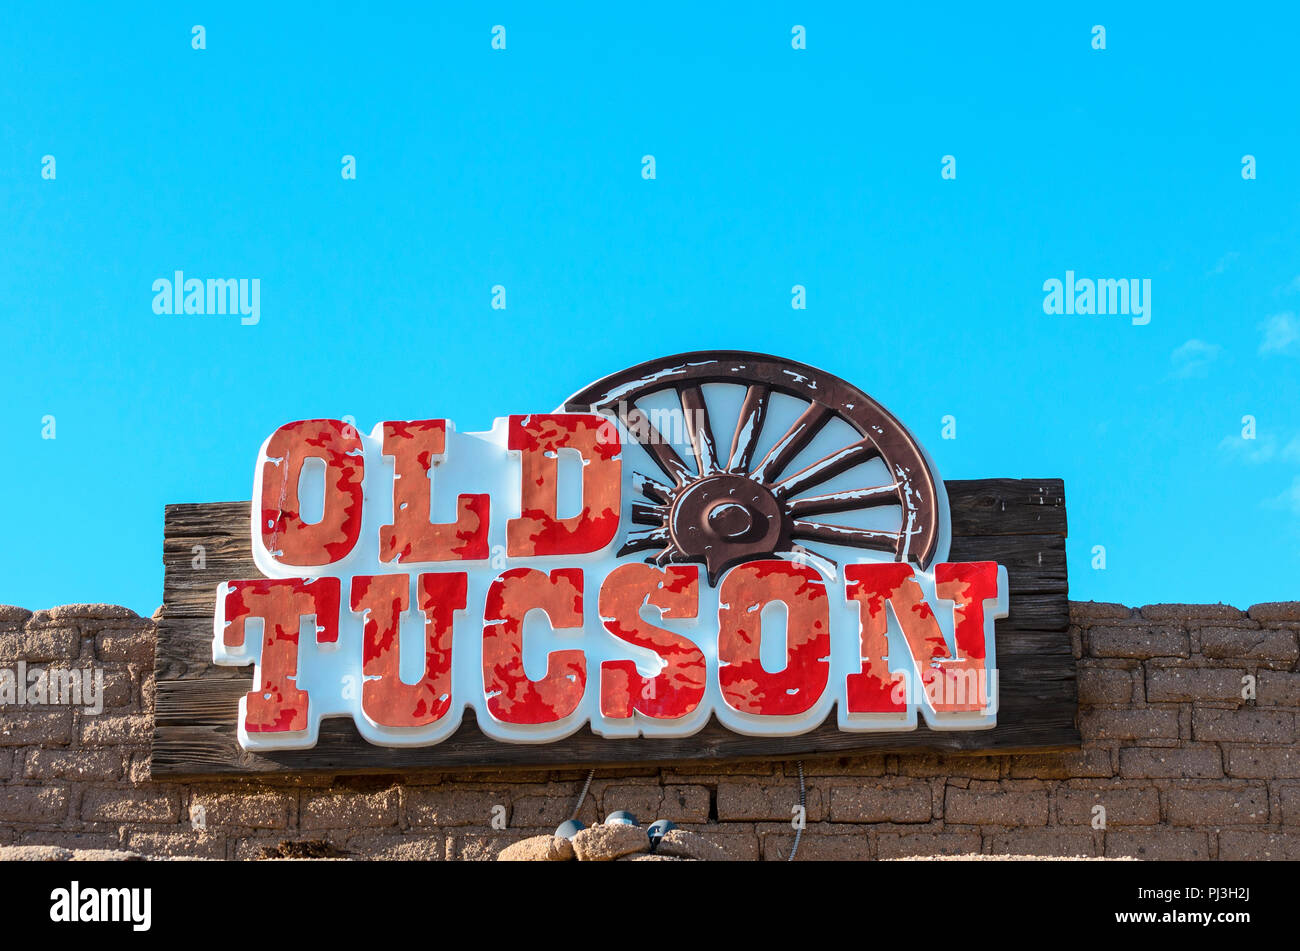 The entrance sign “Old Tucson” with wagon wheel. Stock Photo